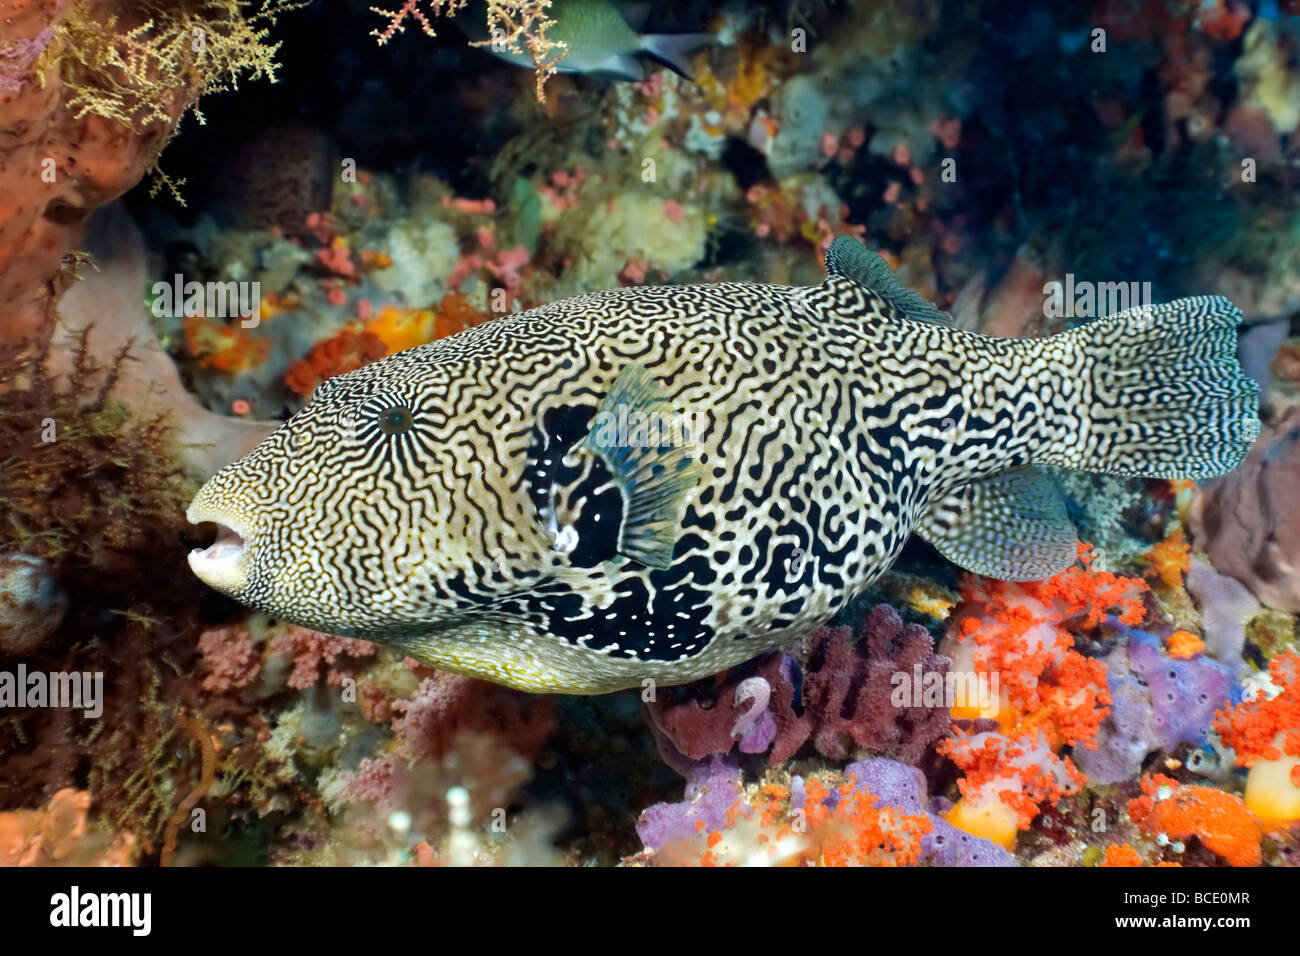 A Map Pufferfish glides by a coral reef near Komodo Island in the Flores Sea, Indonesia. Stock Photo